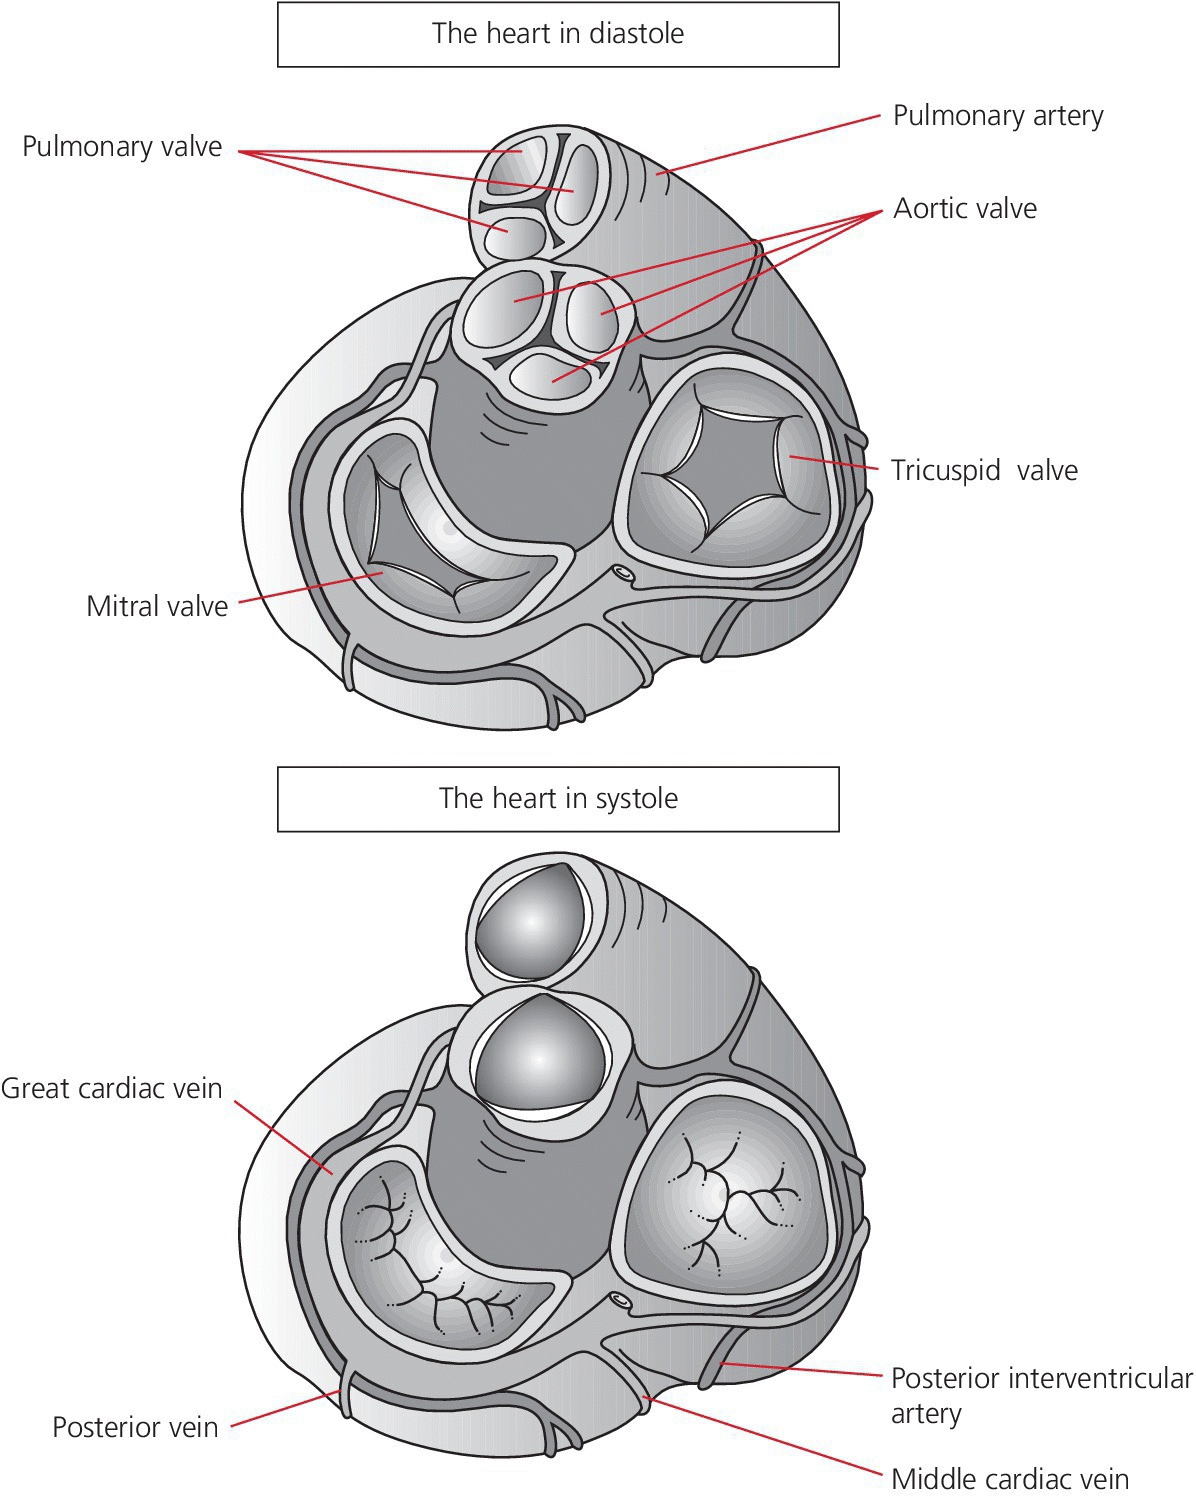 2 Illustrations of the cardiac structures during diastole (top) and systole (bottom), with line depicting various parts.